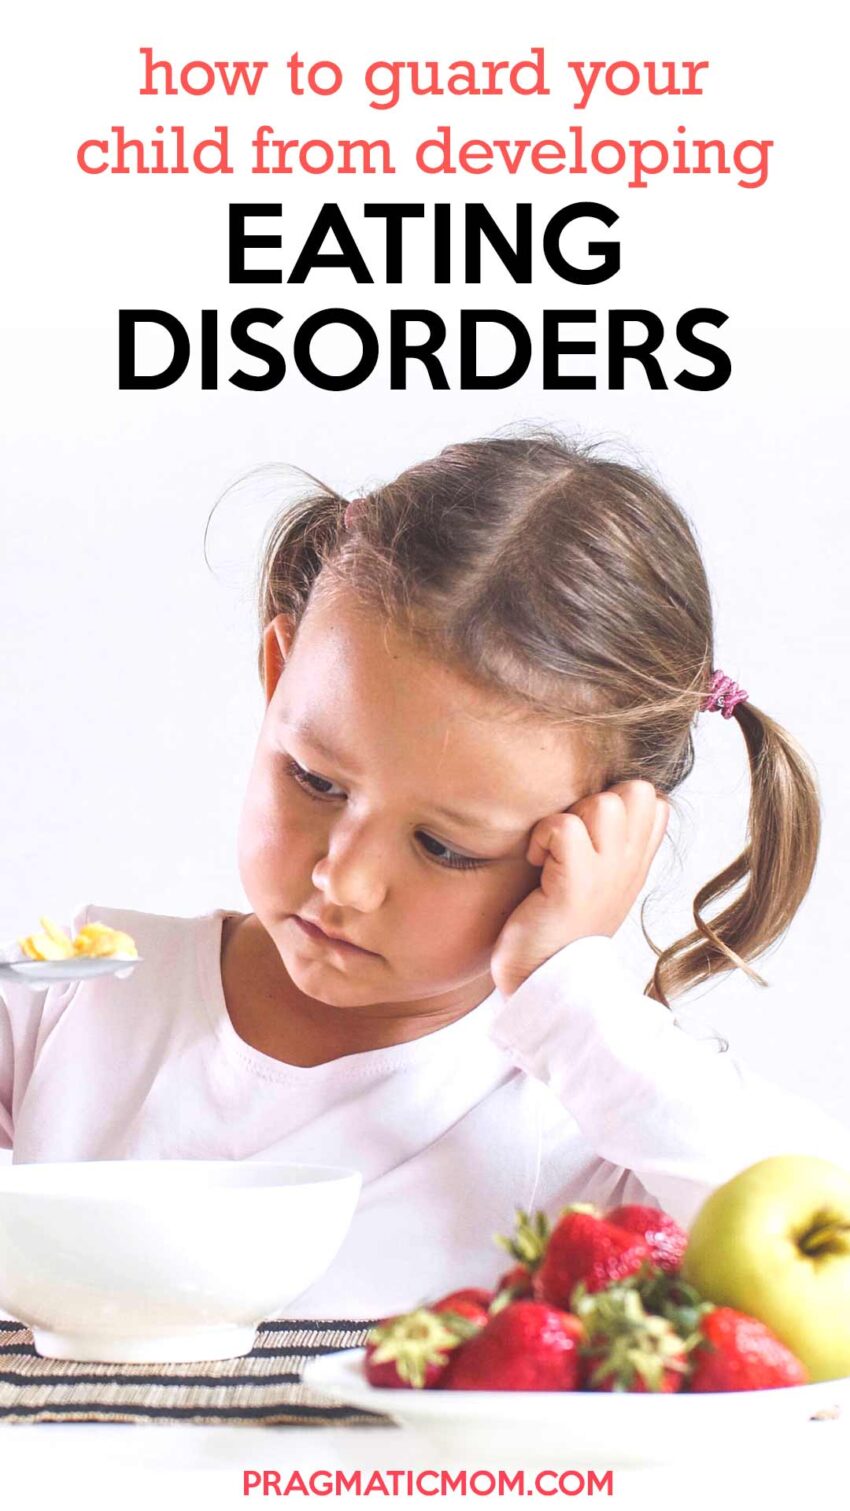 How to Guard Your Child from Developing Eating Disorders